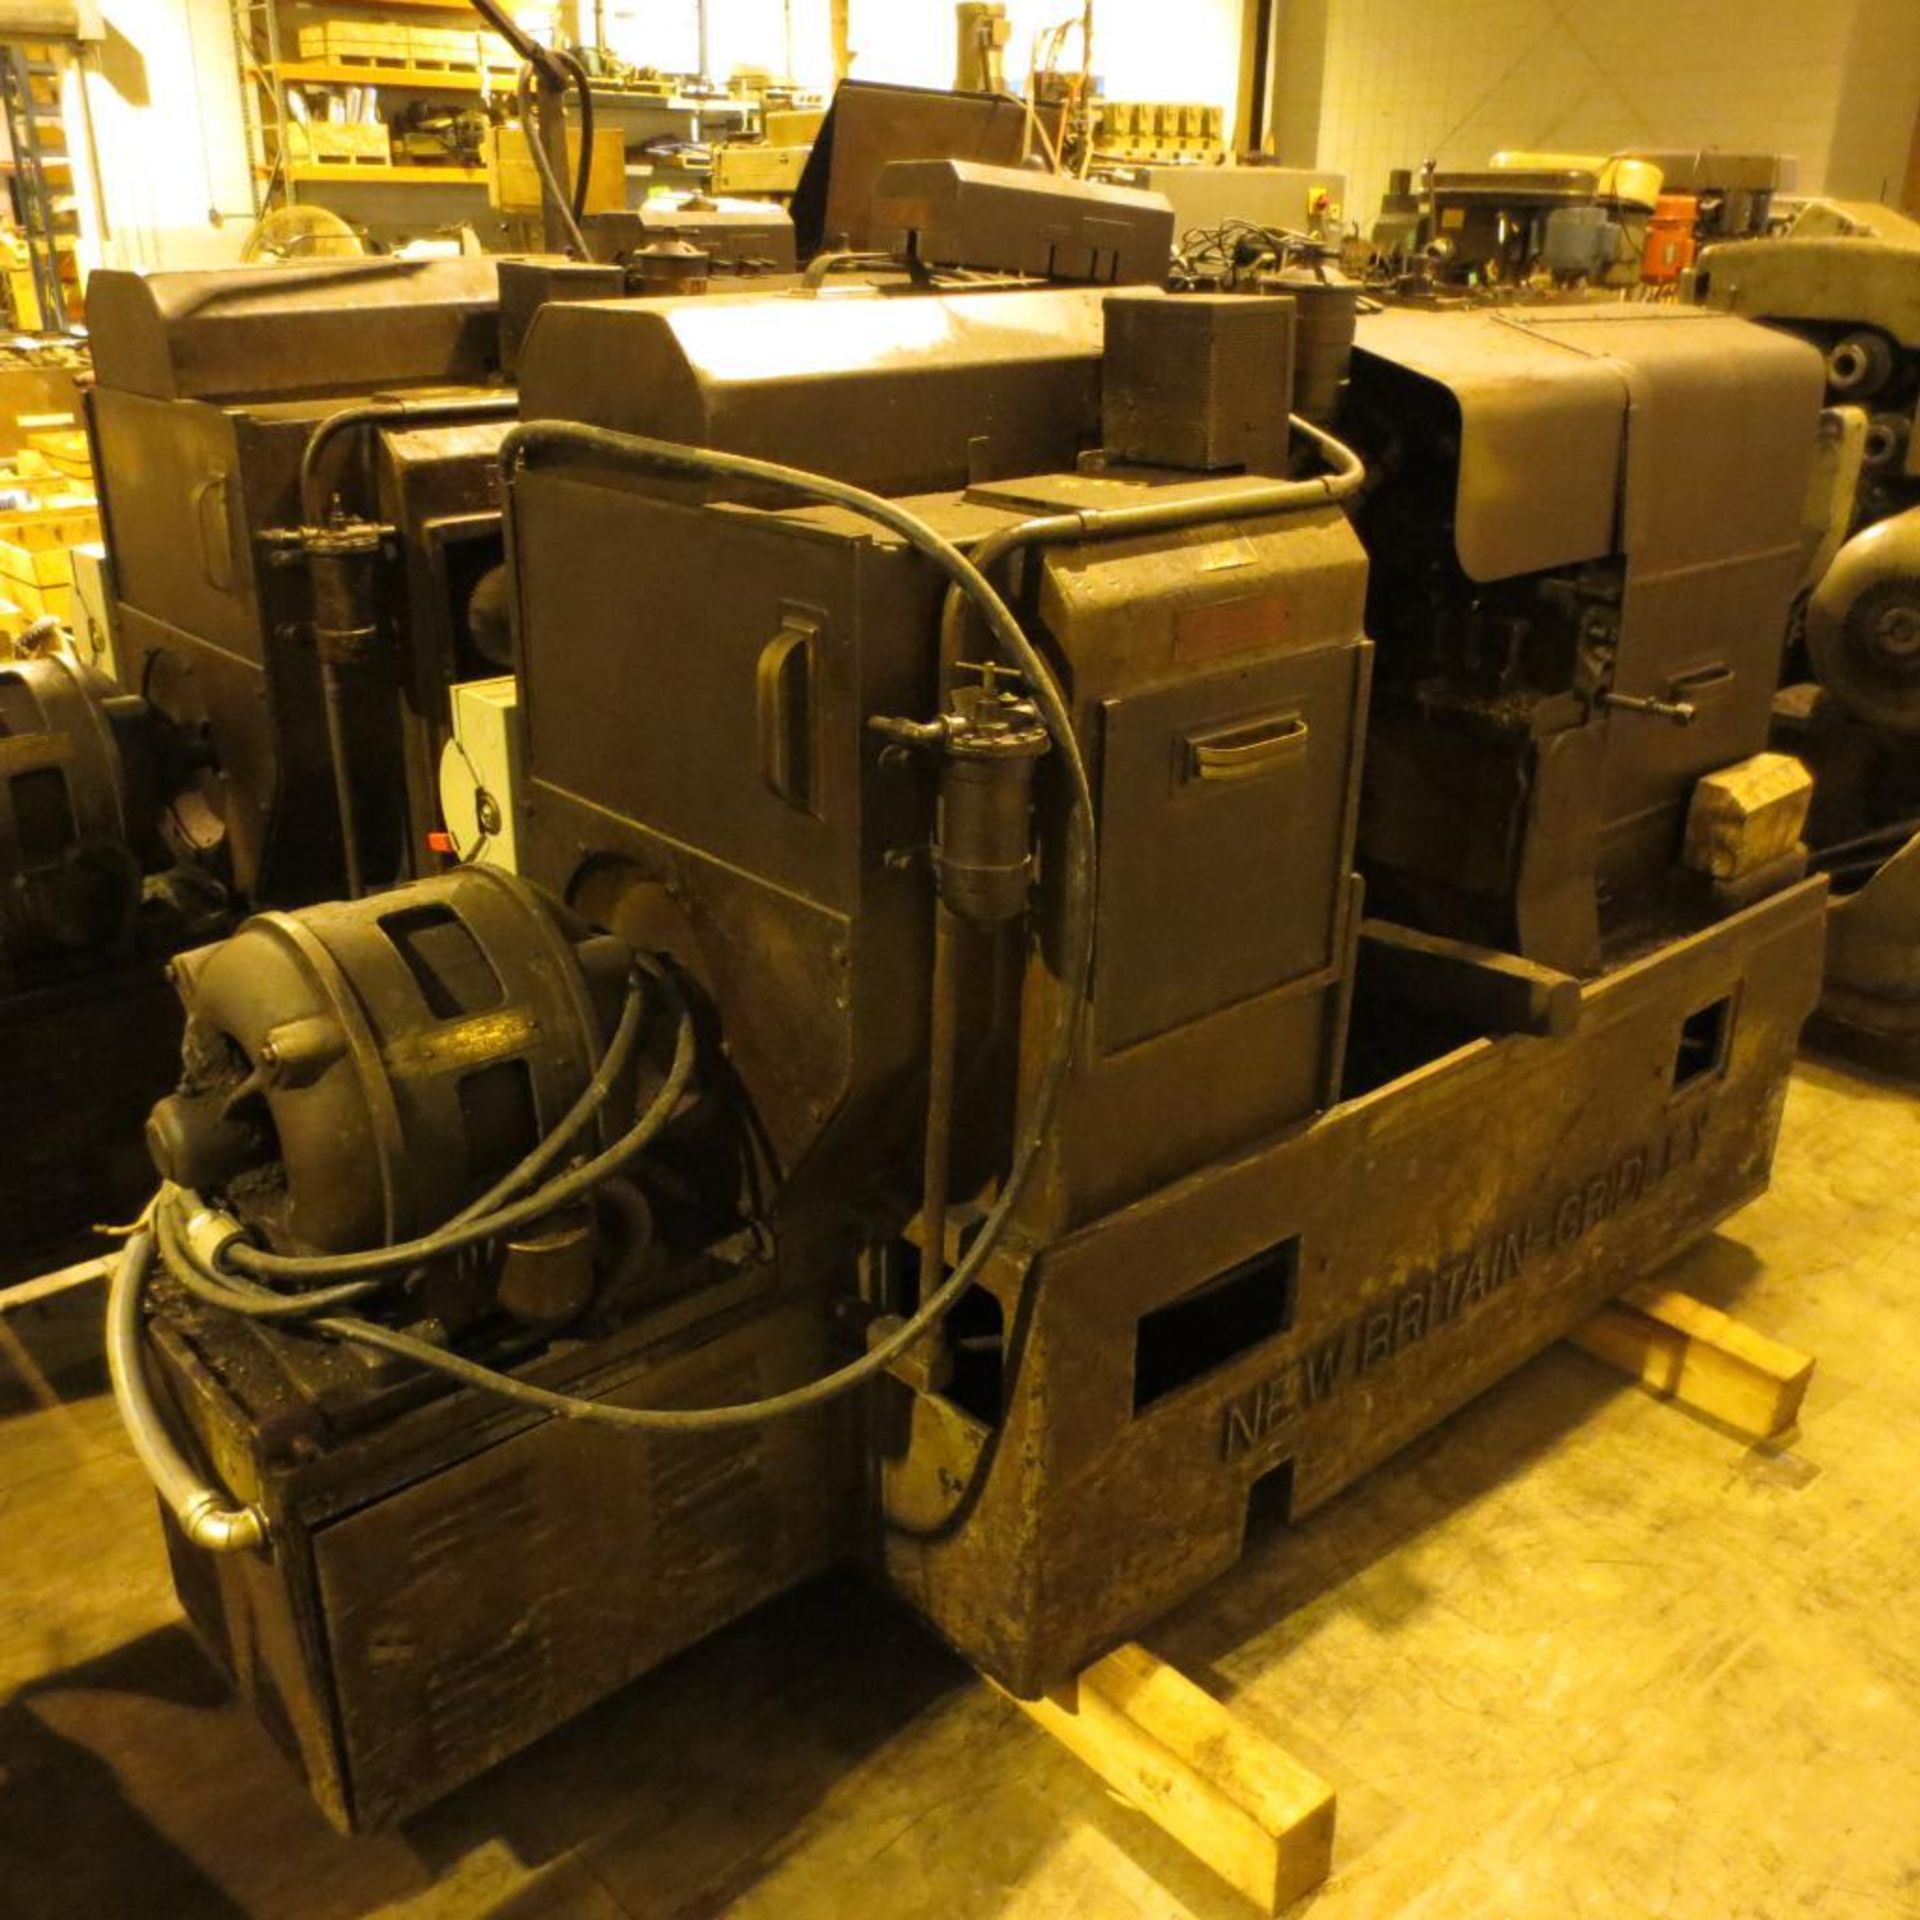 New Britian Gridley 1" Model 40 Multi Spindle Automatic Screw Machine S/N 24945 *RIGGING $150* - Image 3 of 5